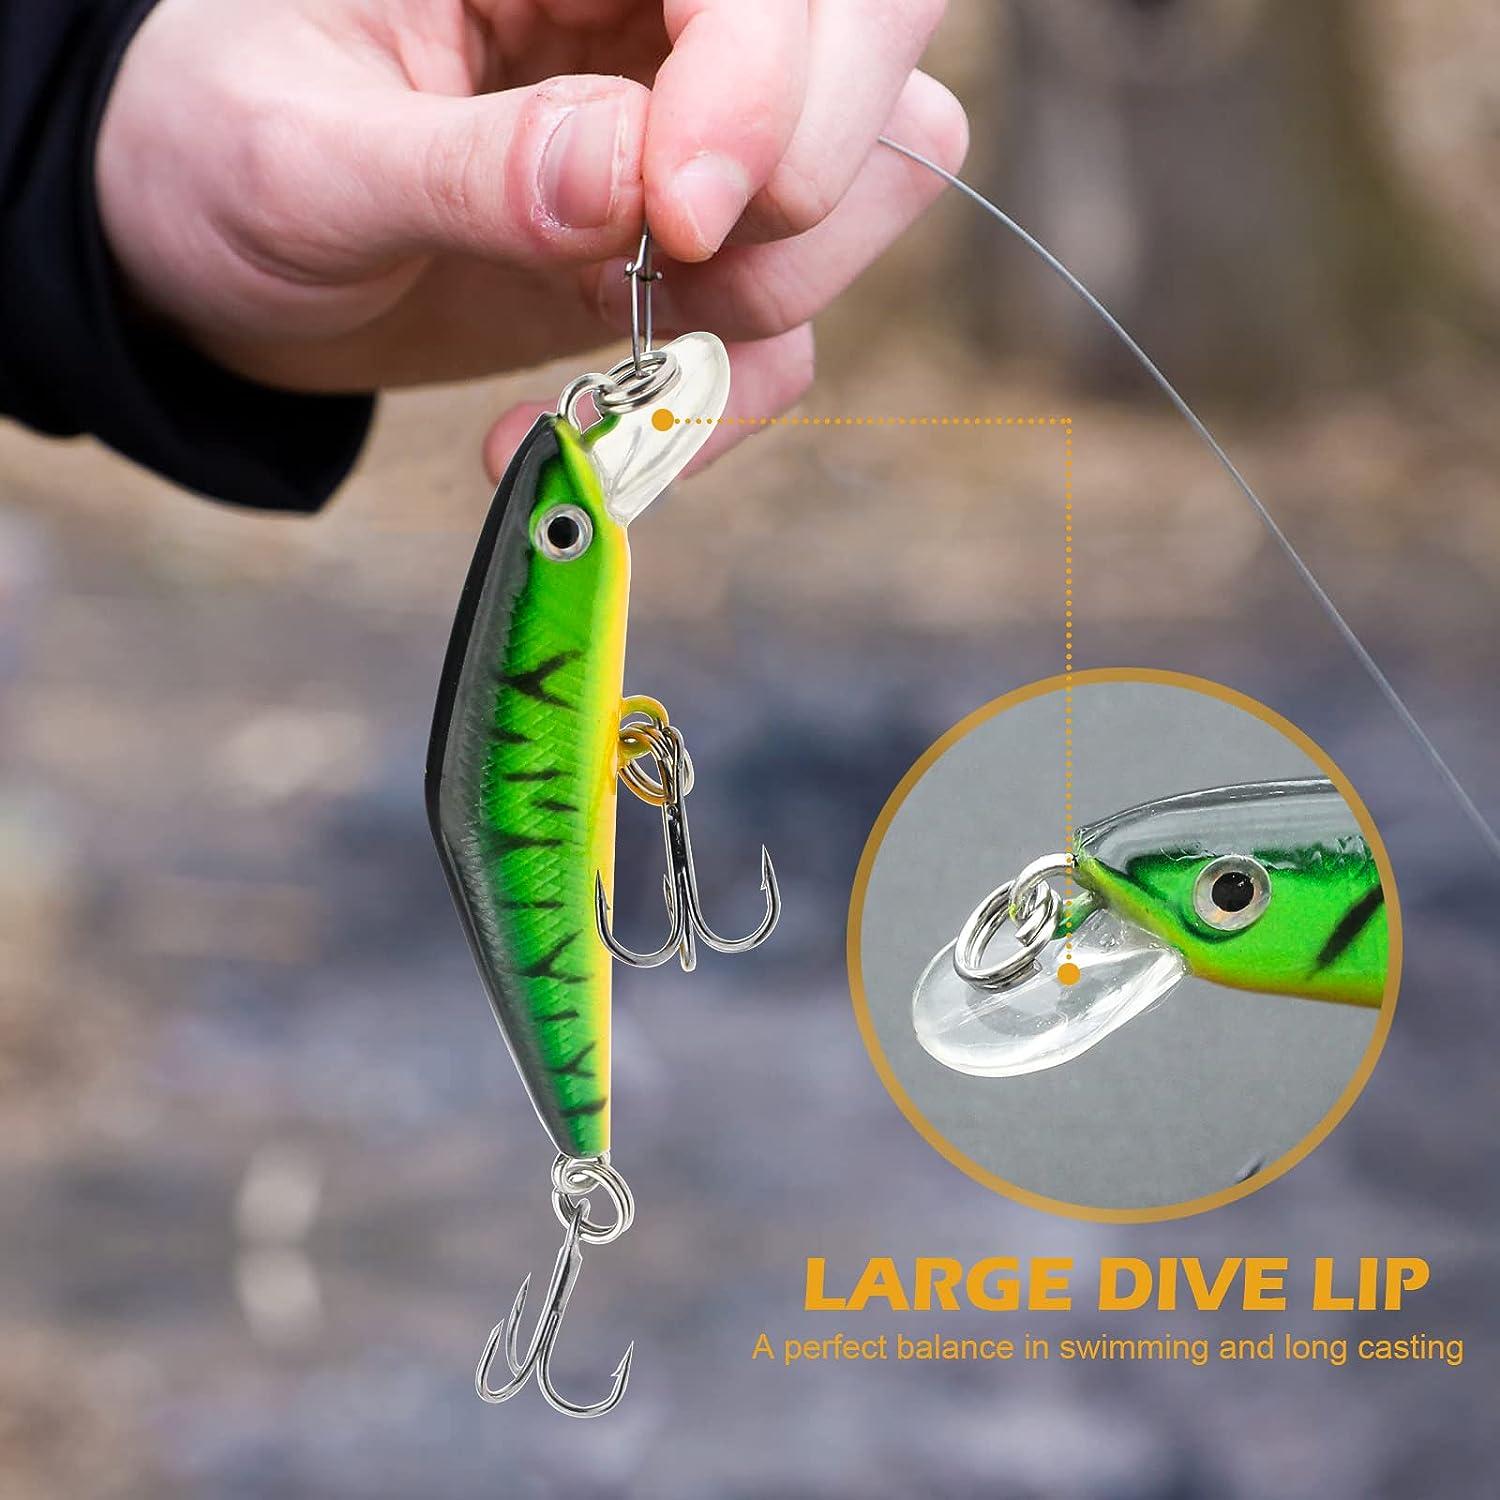 Lifelike Fishing Lures for Bass, Trout, Walleye, Predator Fish - Realistic  Multi Jointed Fish Popper Swimbaits - Spinnerbaits Lure Fishing Tackle Kits